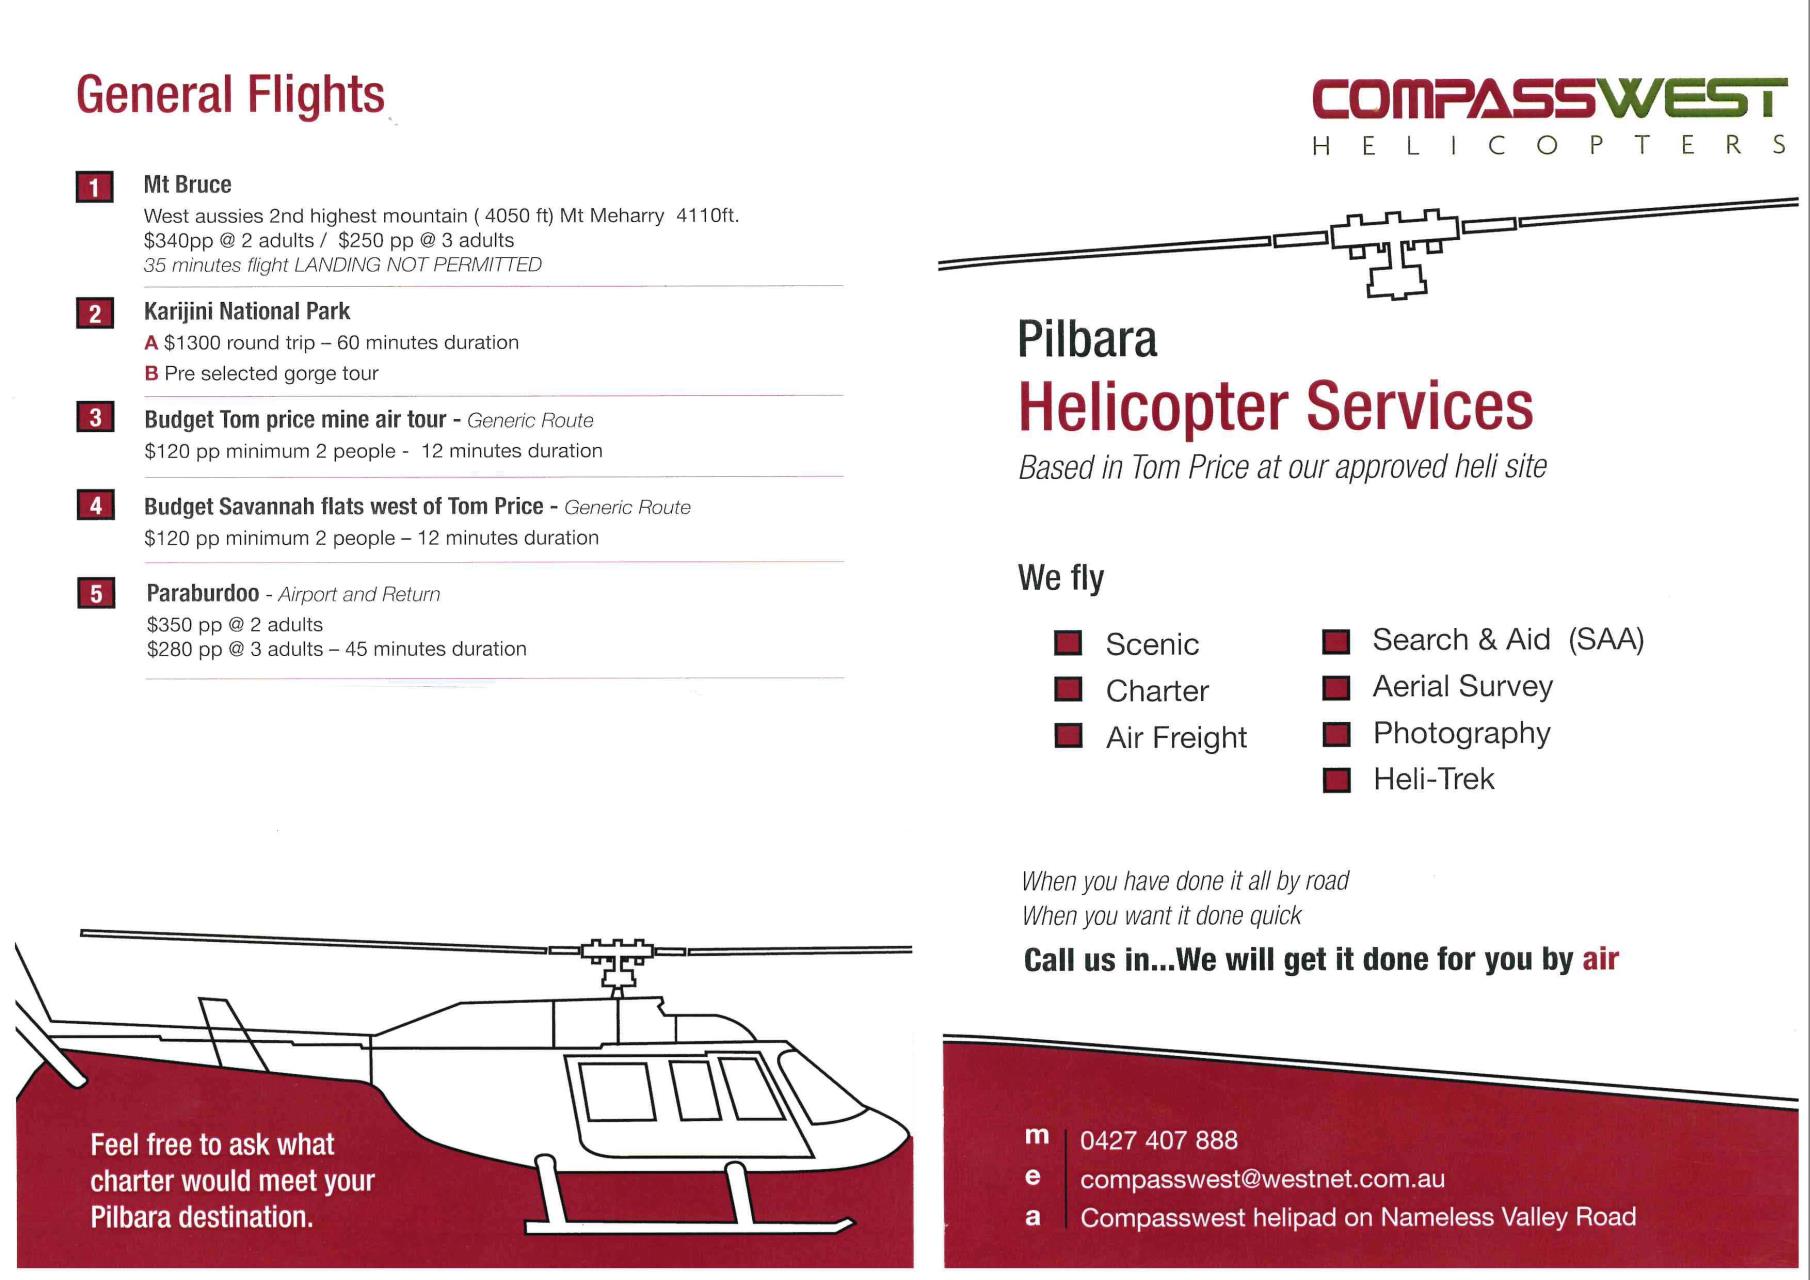 Pilbara Helicopter Services operating from Tom Price